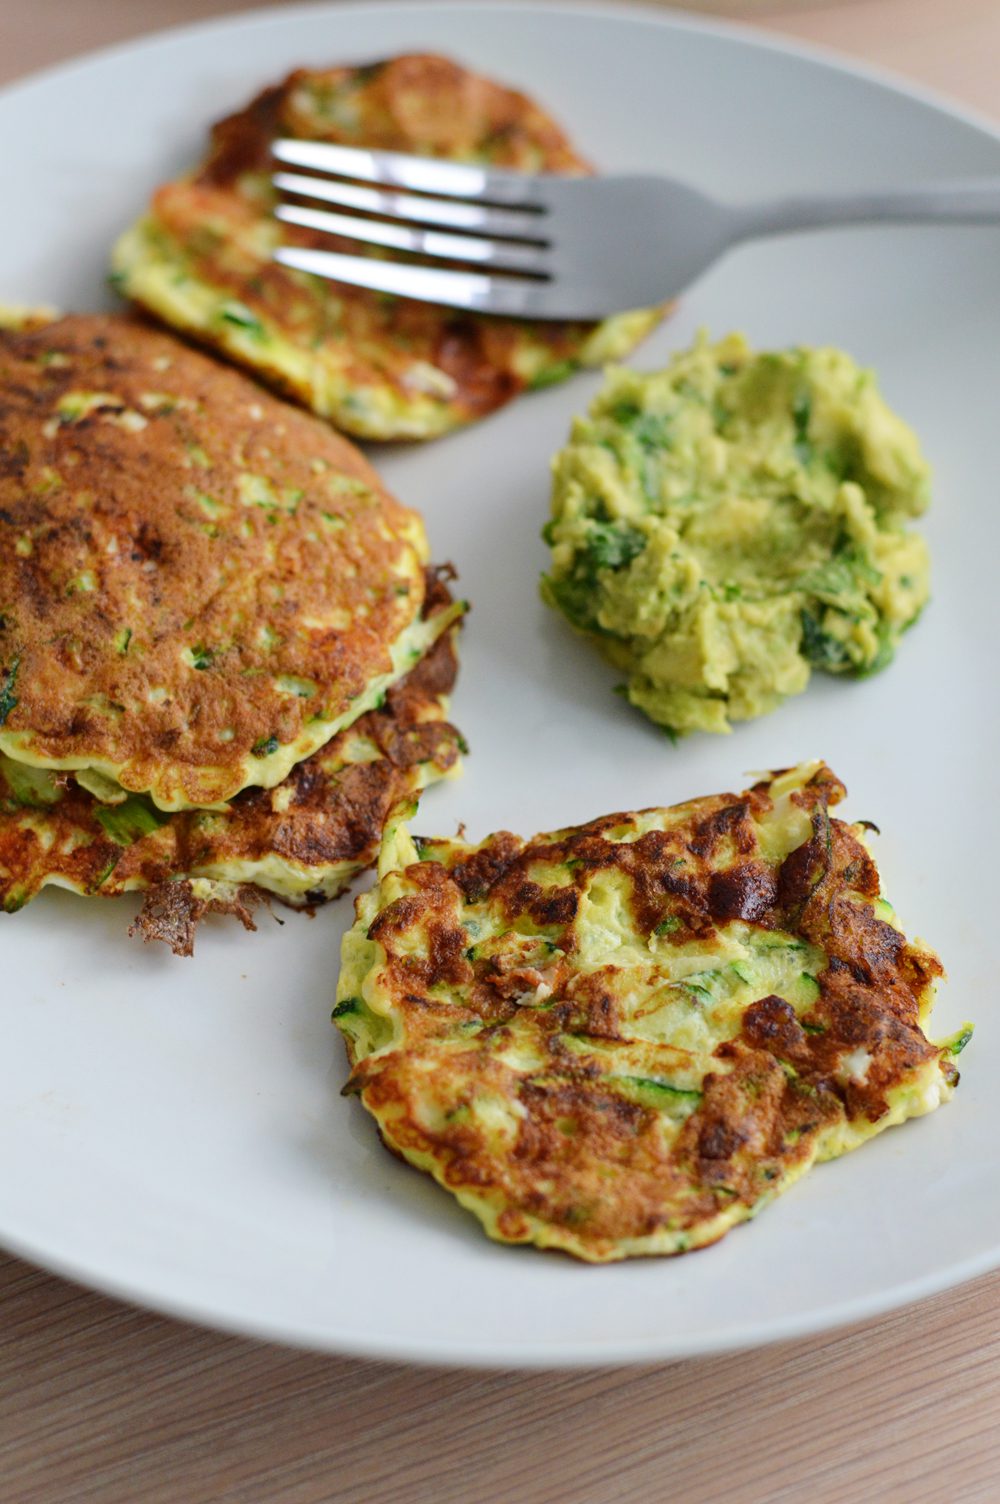 Courgette and feta fritters 2